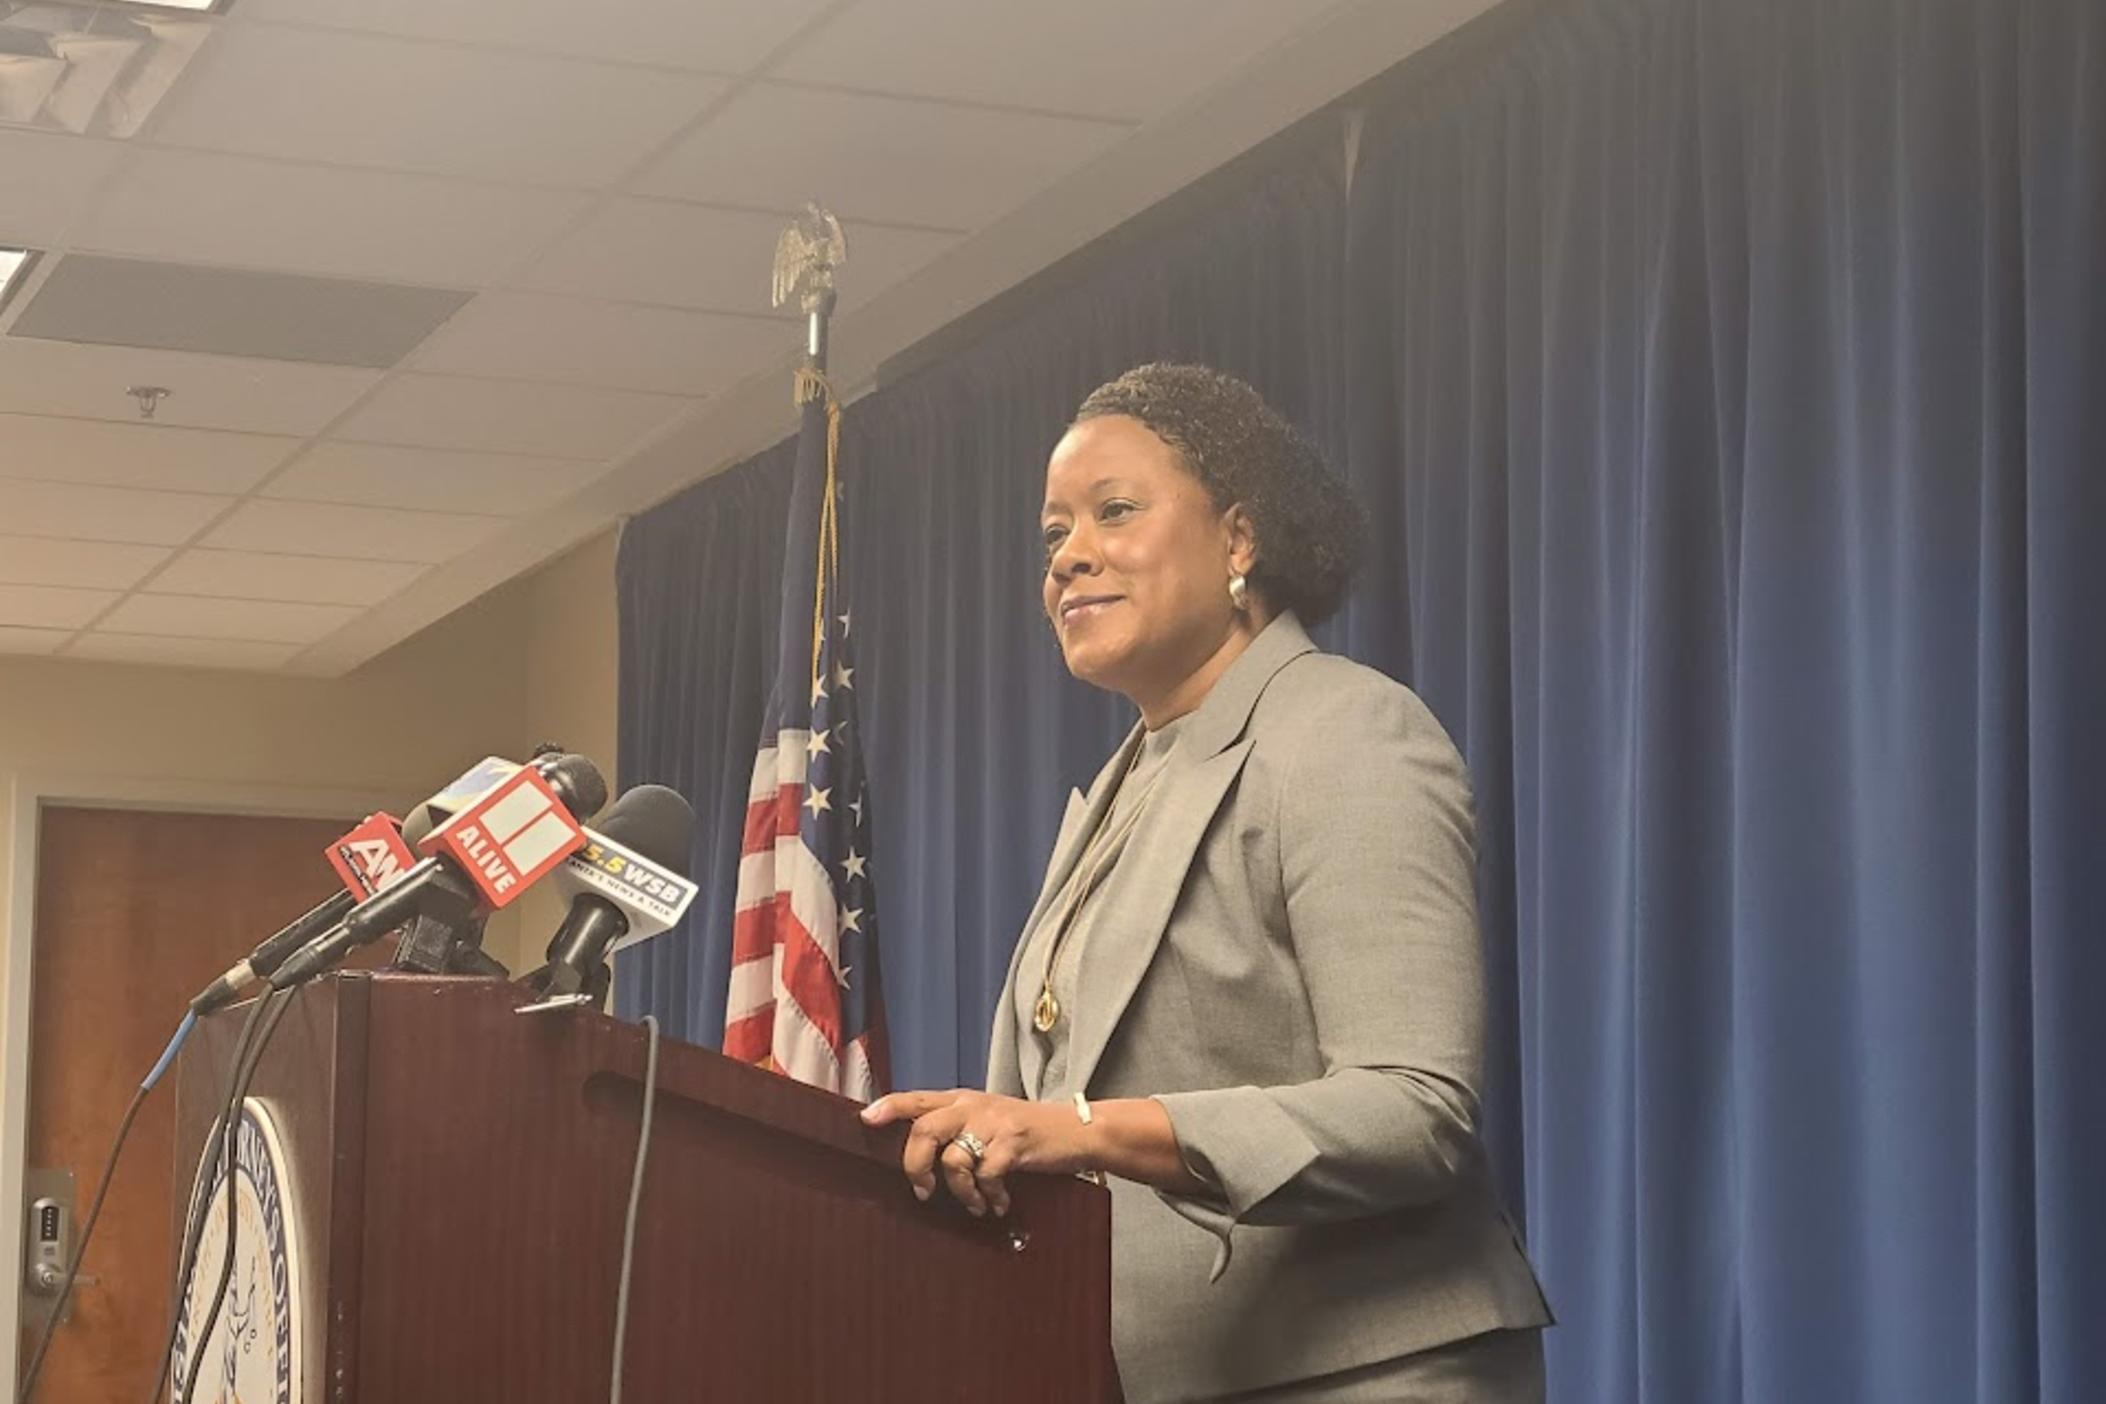 Dekalb County District Attorney Sherry Boston announced her office would not handle the investigation into a protester being killed on Jan 18th. The case will go to an independent investigator.